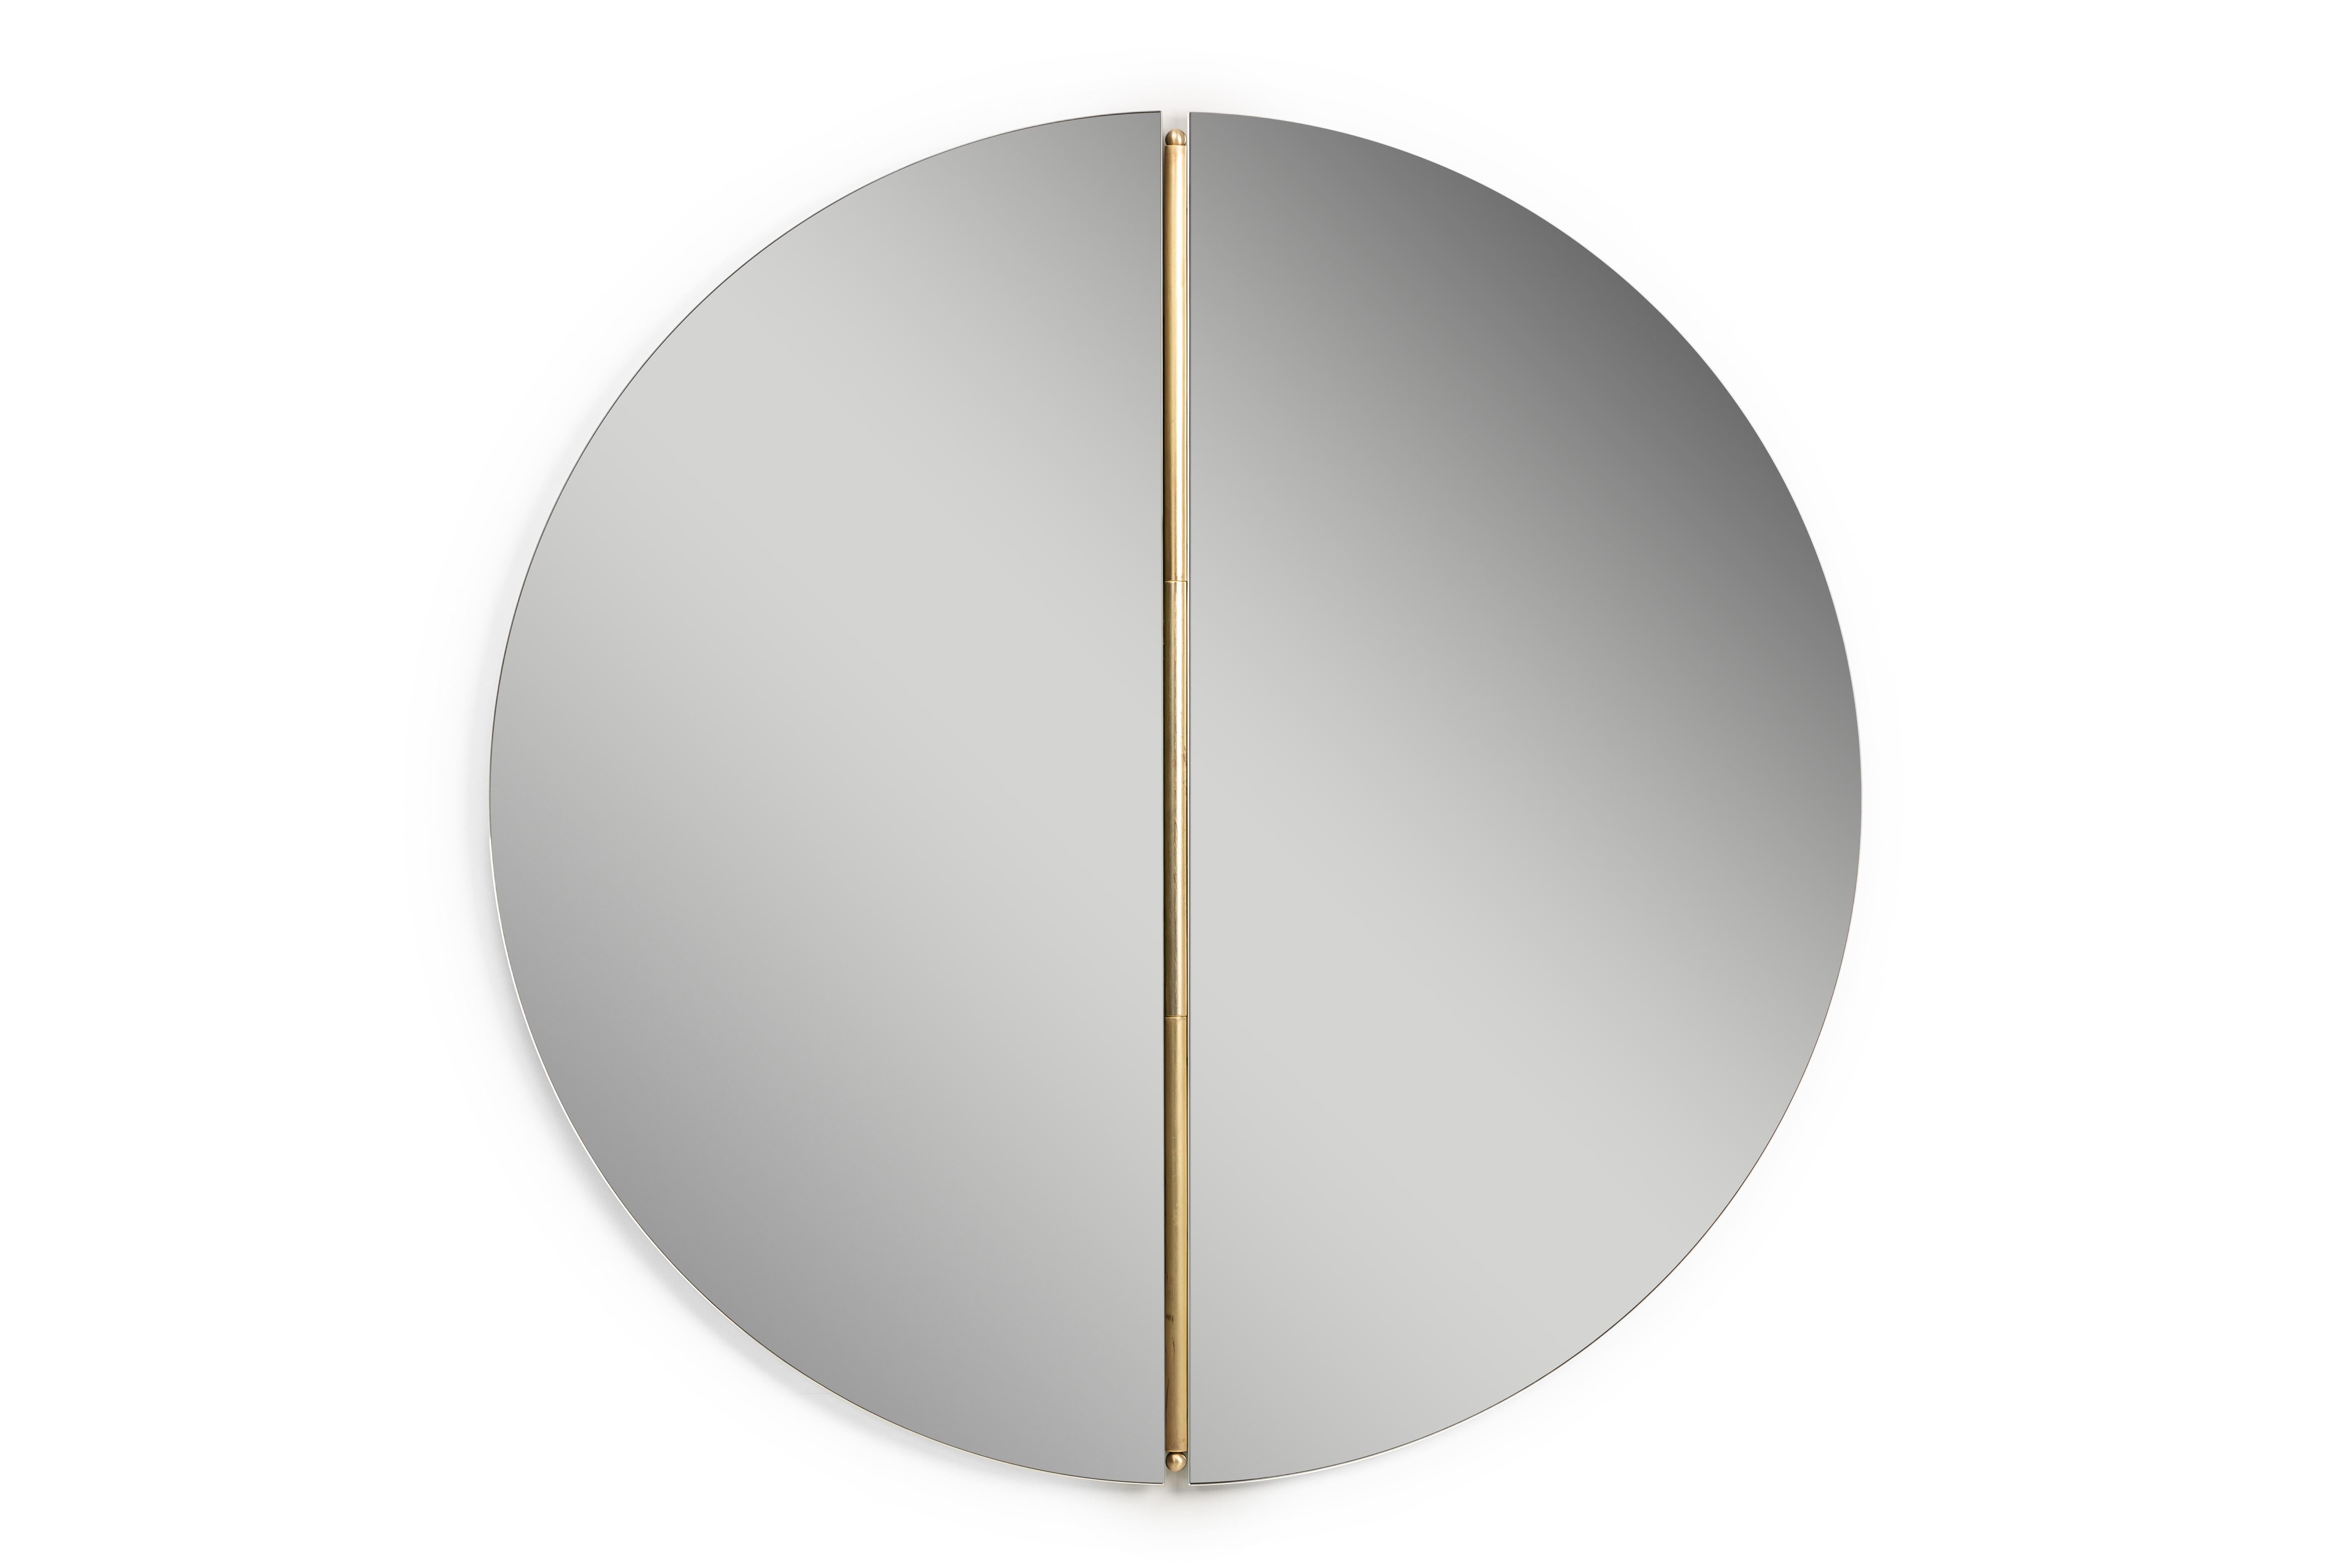 Rondò mirror by Mingardo
Dimensions: D100 x H 100 cm 
Materials: Matt brass plated stainless steel structure
Weight: 40 kg

Also Available in different dimensions.

Rondò reinterprets the classic round mirror to adapt it to any domestic environment,